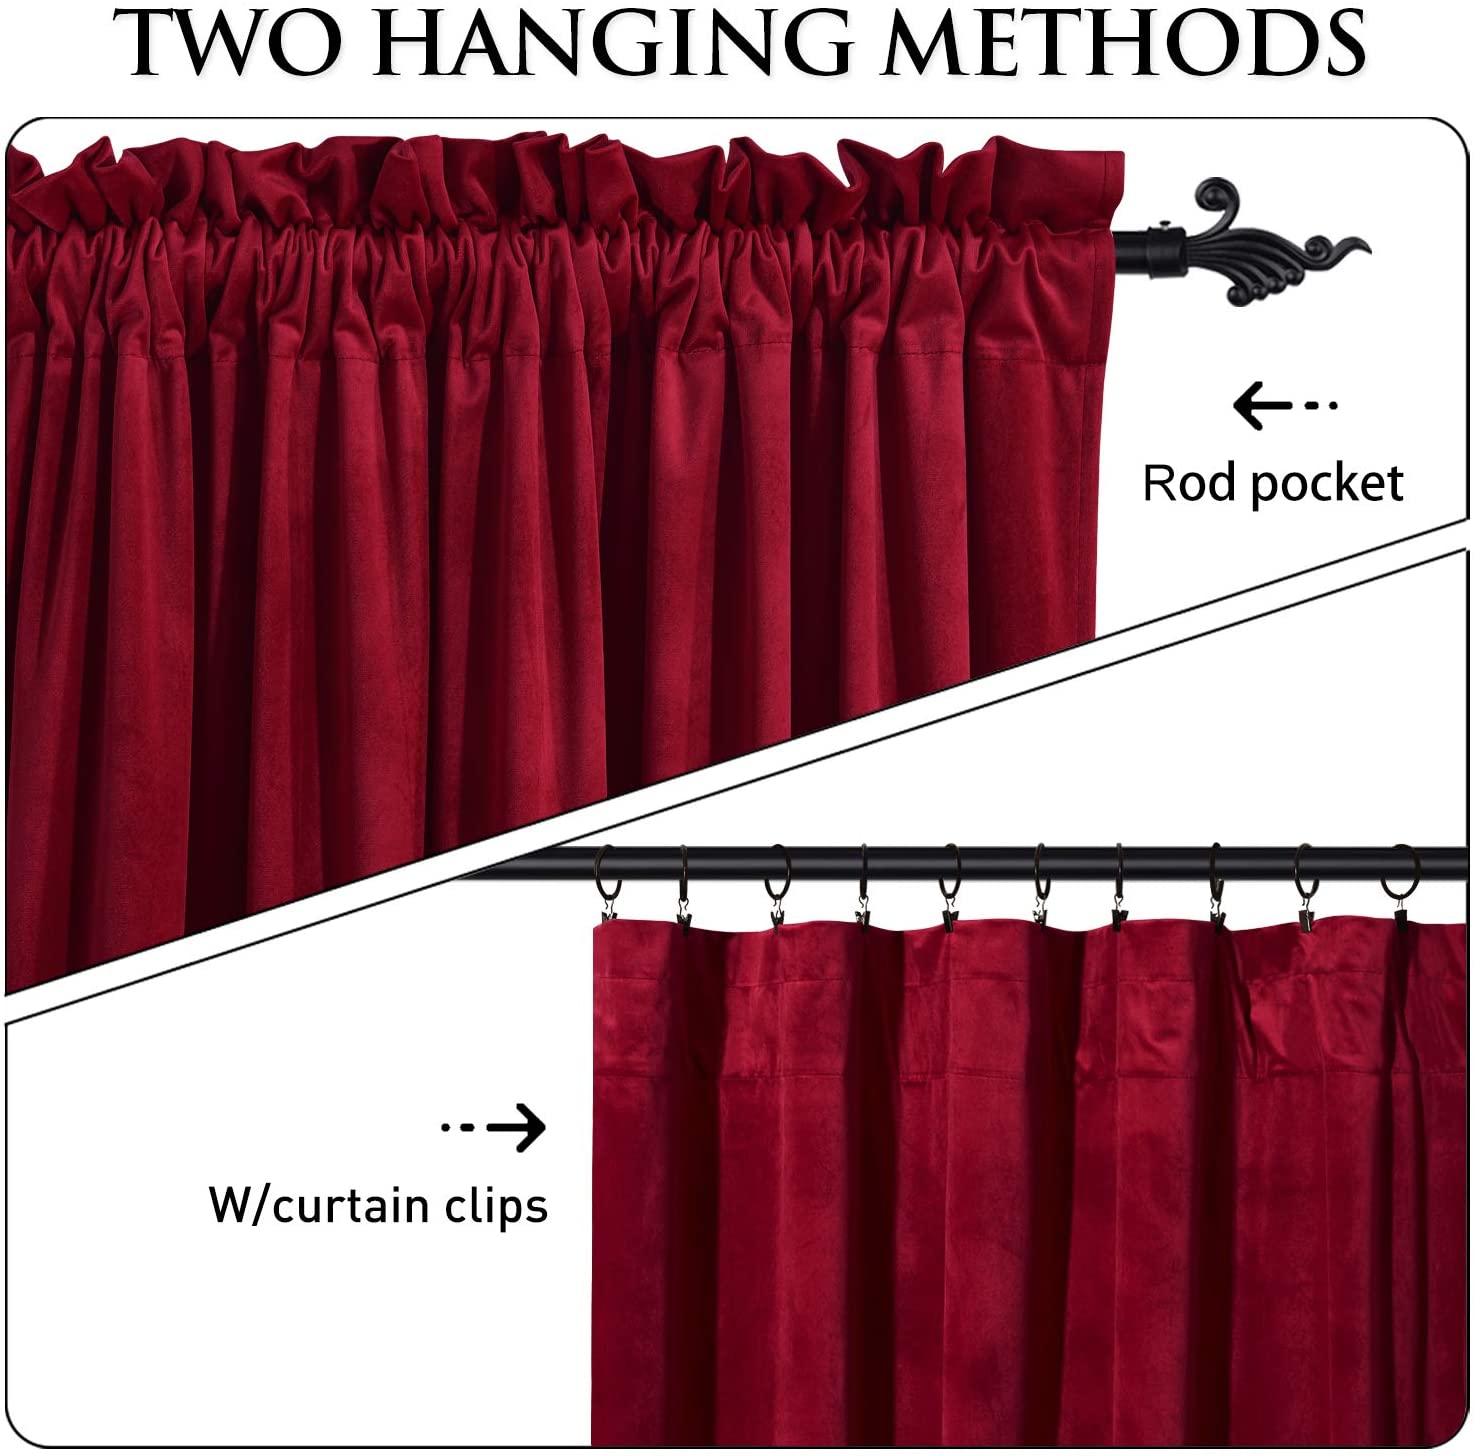 Custom Christmas Velvet Curtains Privacy Curtains Rod Pocket Thermal Curtain 2 Panels KGORGE Store